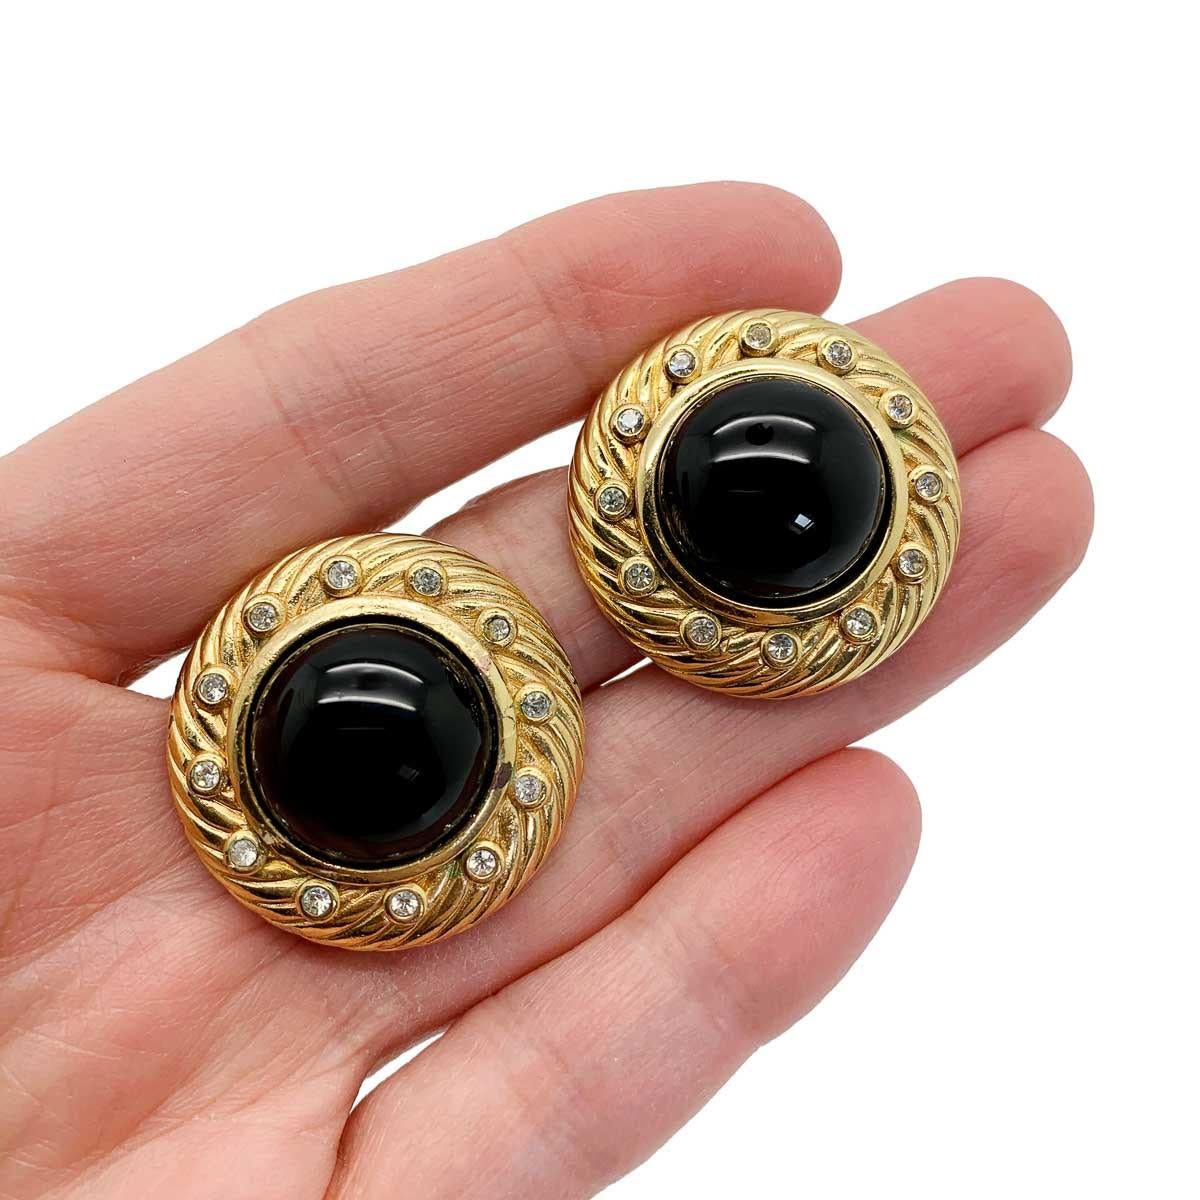 A super stylish pair of vintage Dior onyx glass earrings. Featuring a large onyx glass cabochon stone framed by a deep ribbed gold mount finished with white chatons.
With archive pieces from her own Dior collection displayed in London's highly